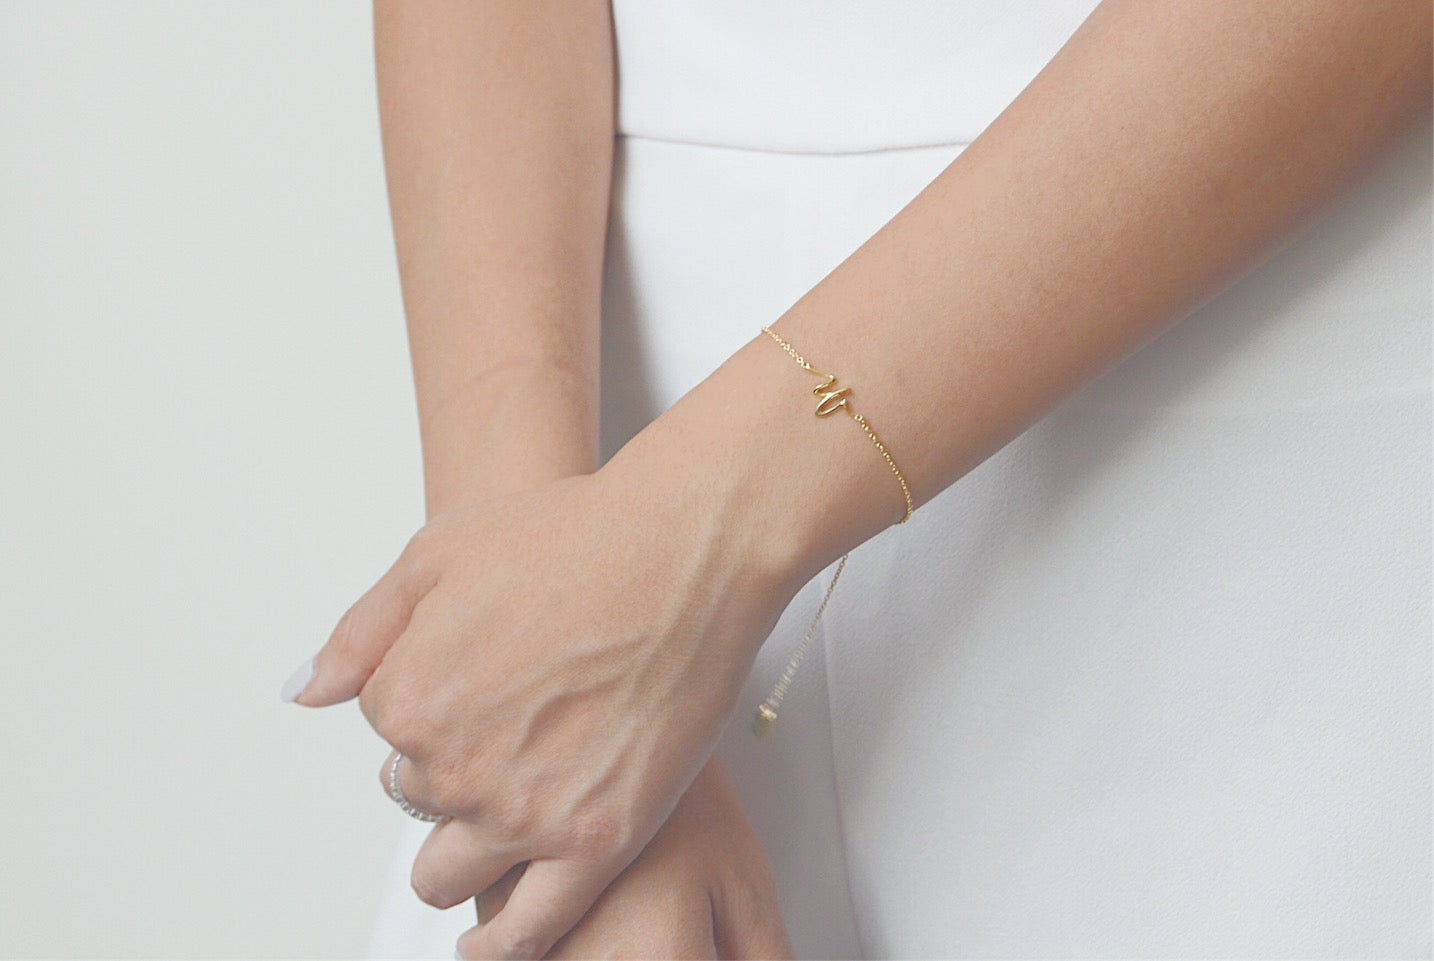 The Love Collect - "W" Bracelet